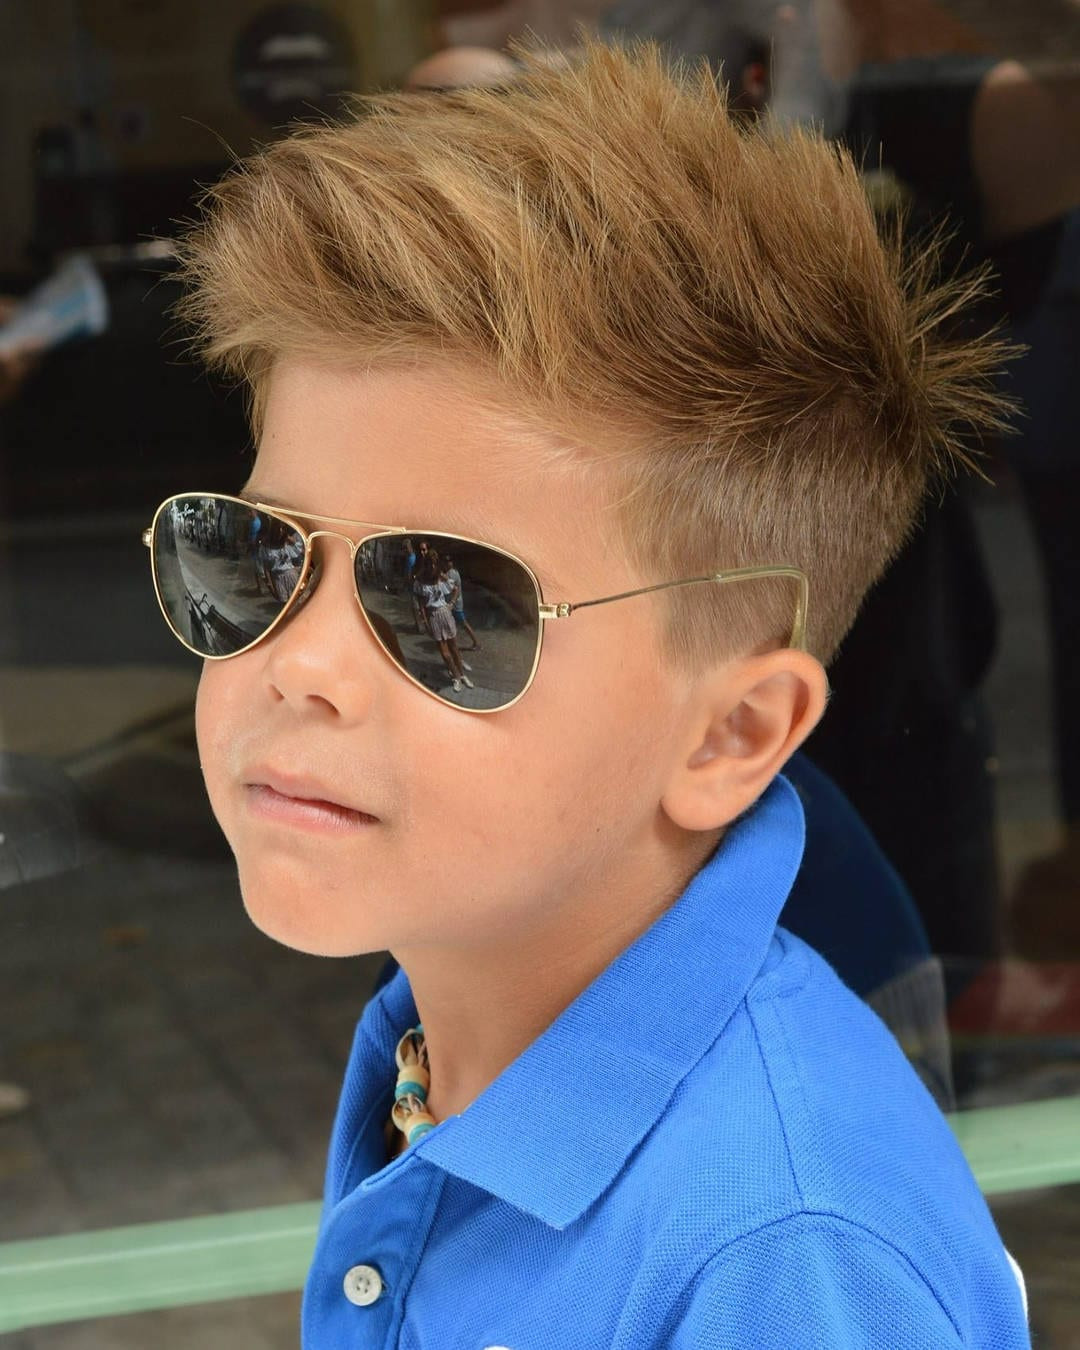 Cool Haircuts For Boys With Long Hair
 90 Cool Haircuts for Kids for 2019